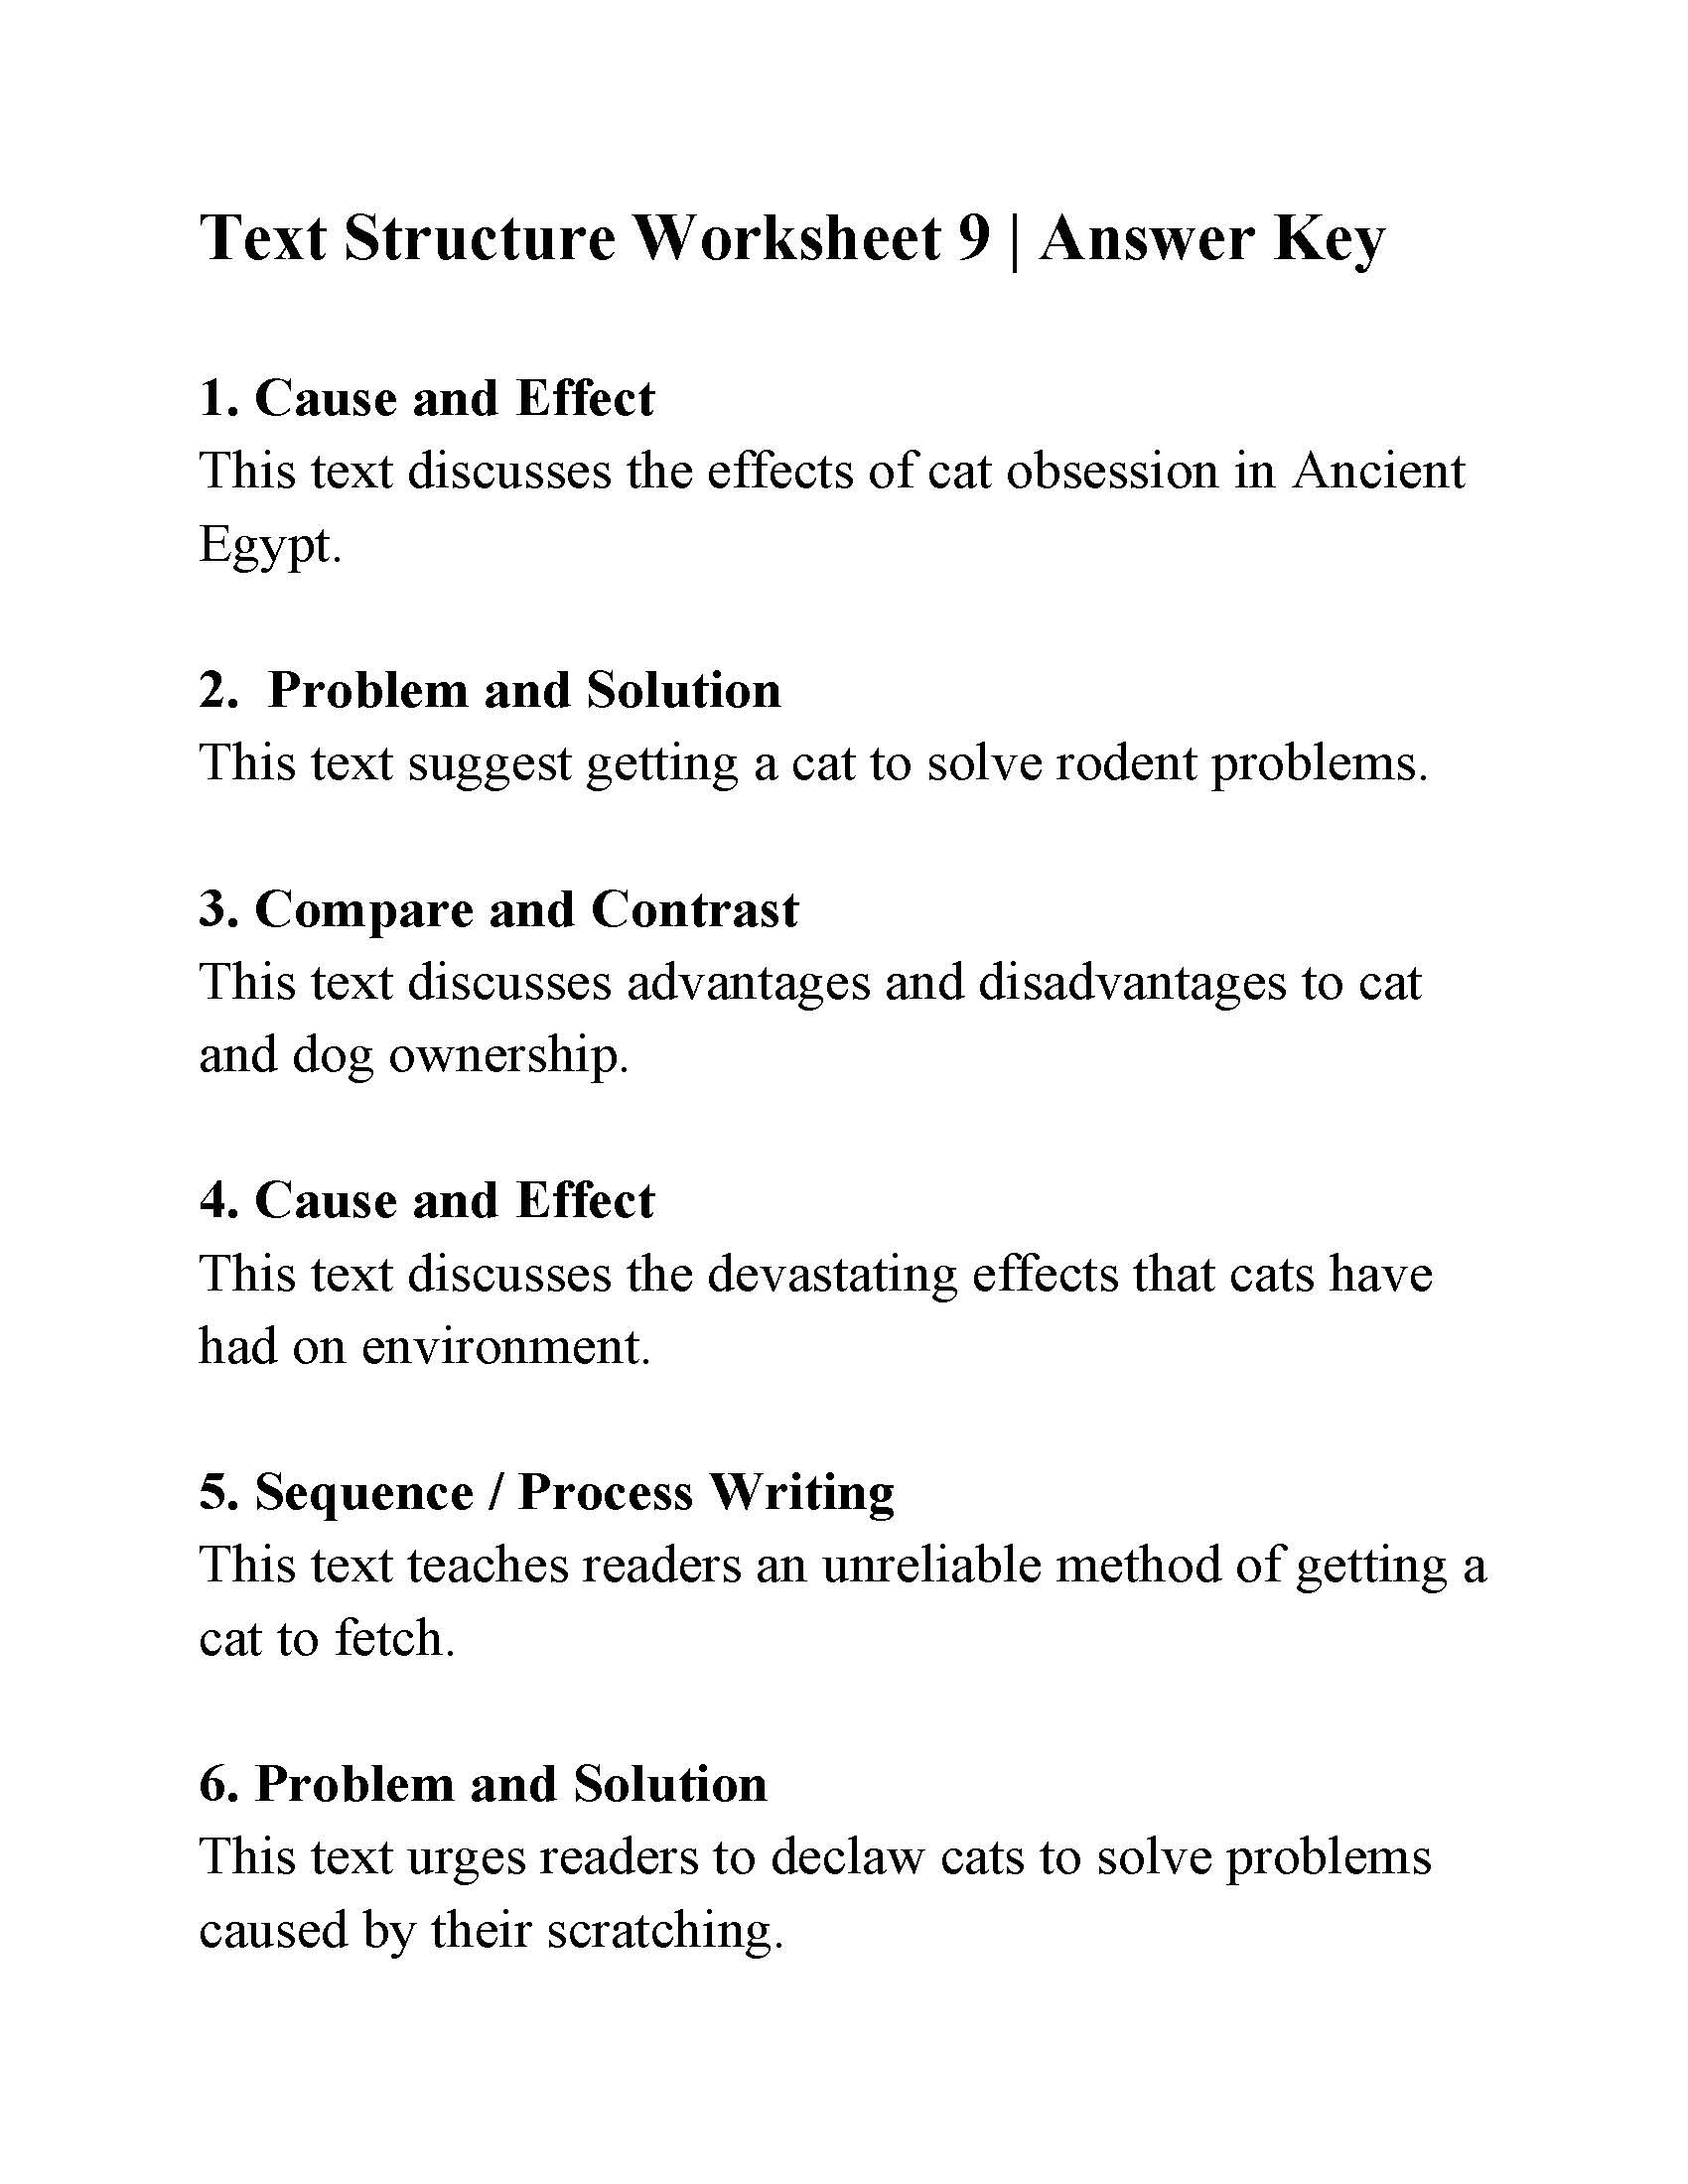 Text Structure Worksheets 4th Grade Text Structure Worksheet 9